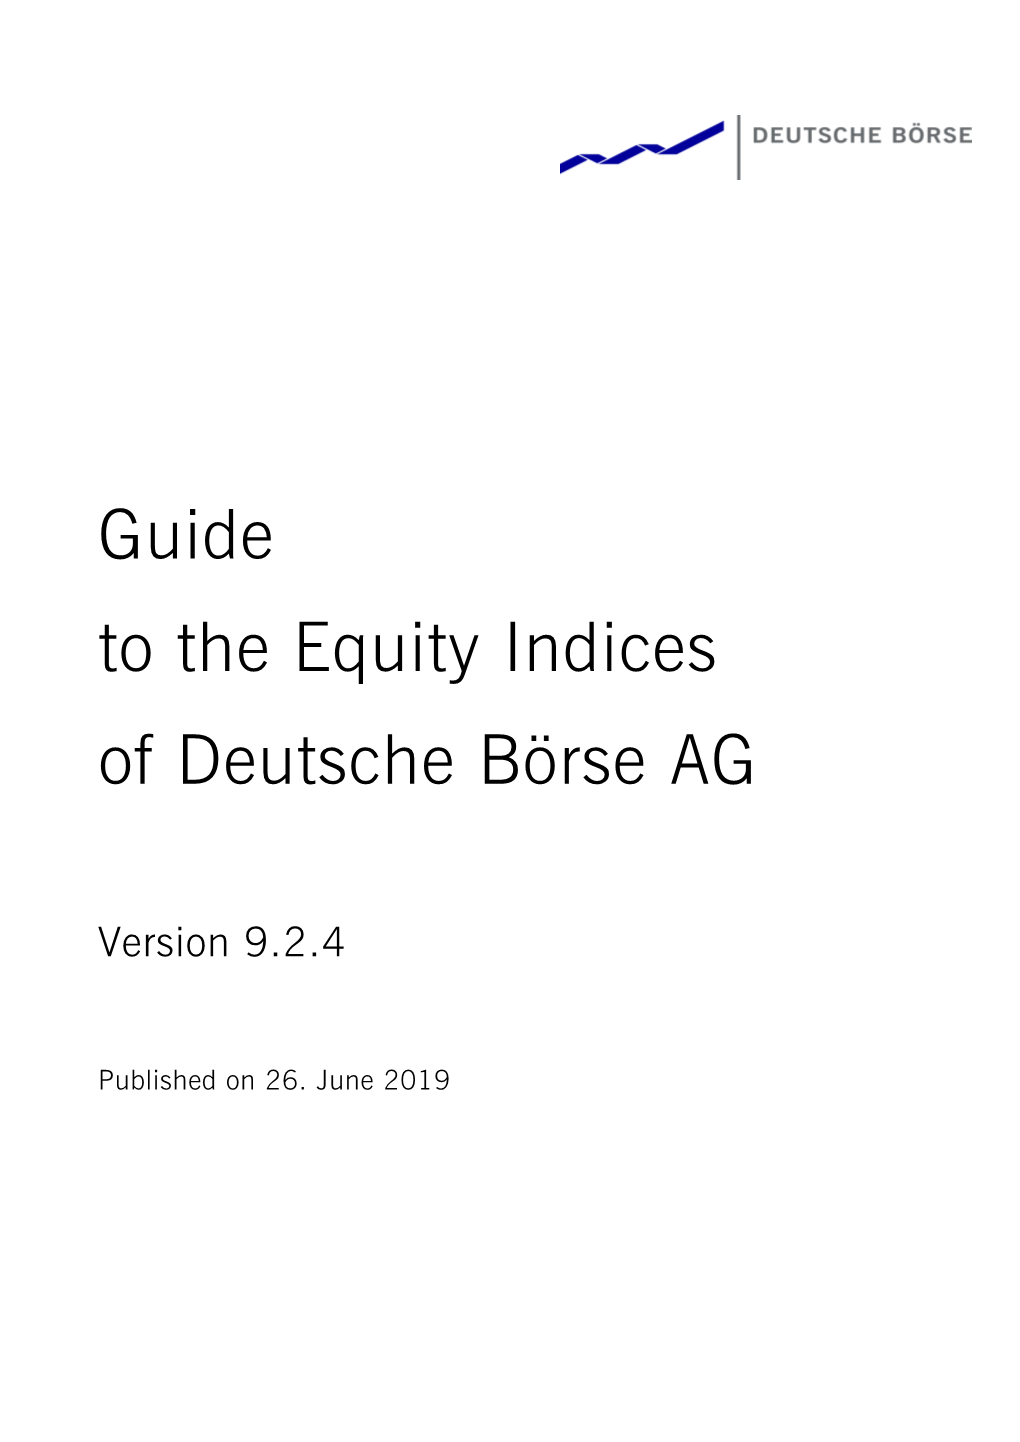 Guide to the Equity Indices of Deutsche Börse AG